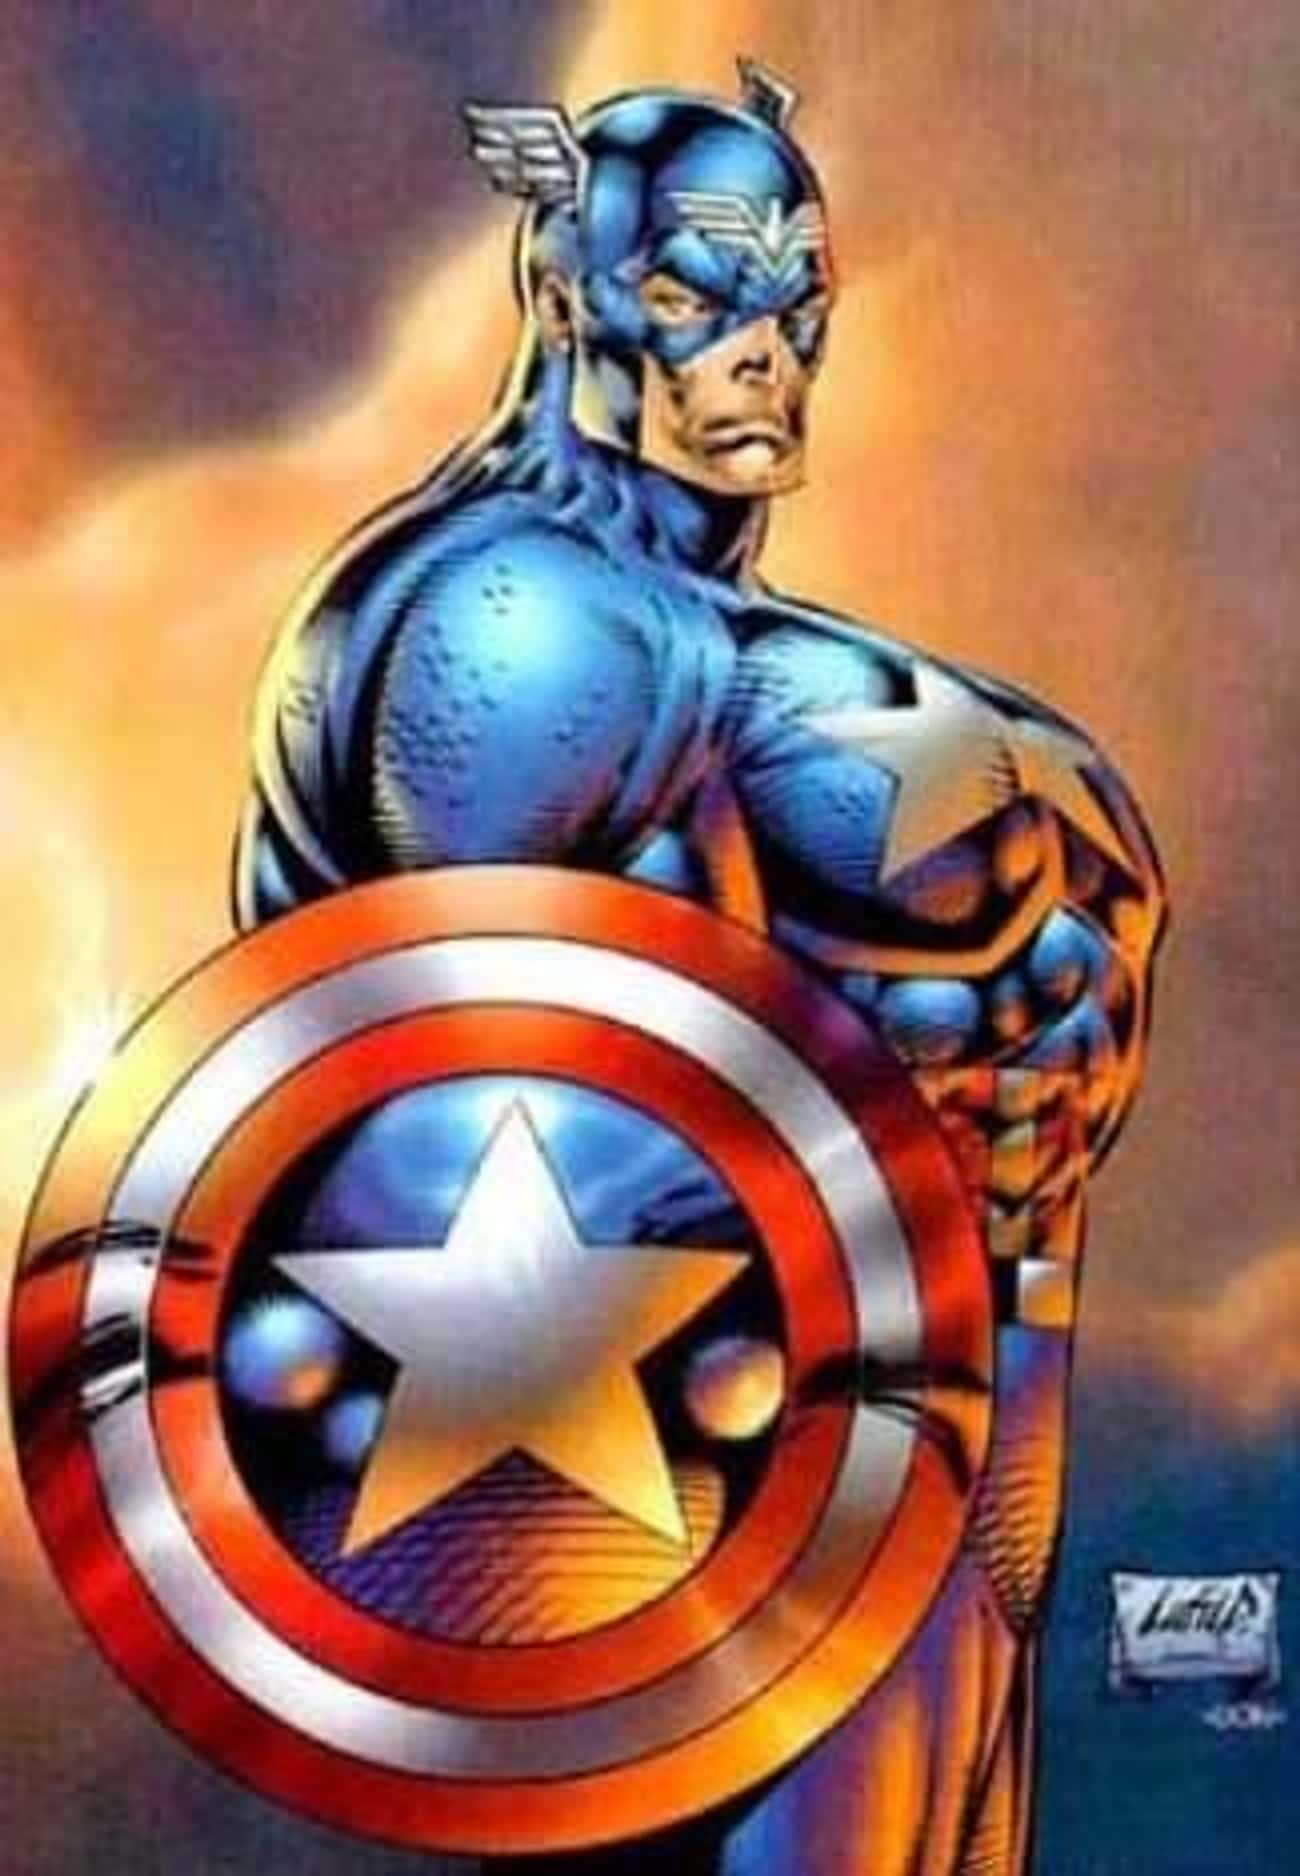 What is the worst Rob Liefeld drawing? ResetEra